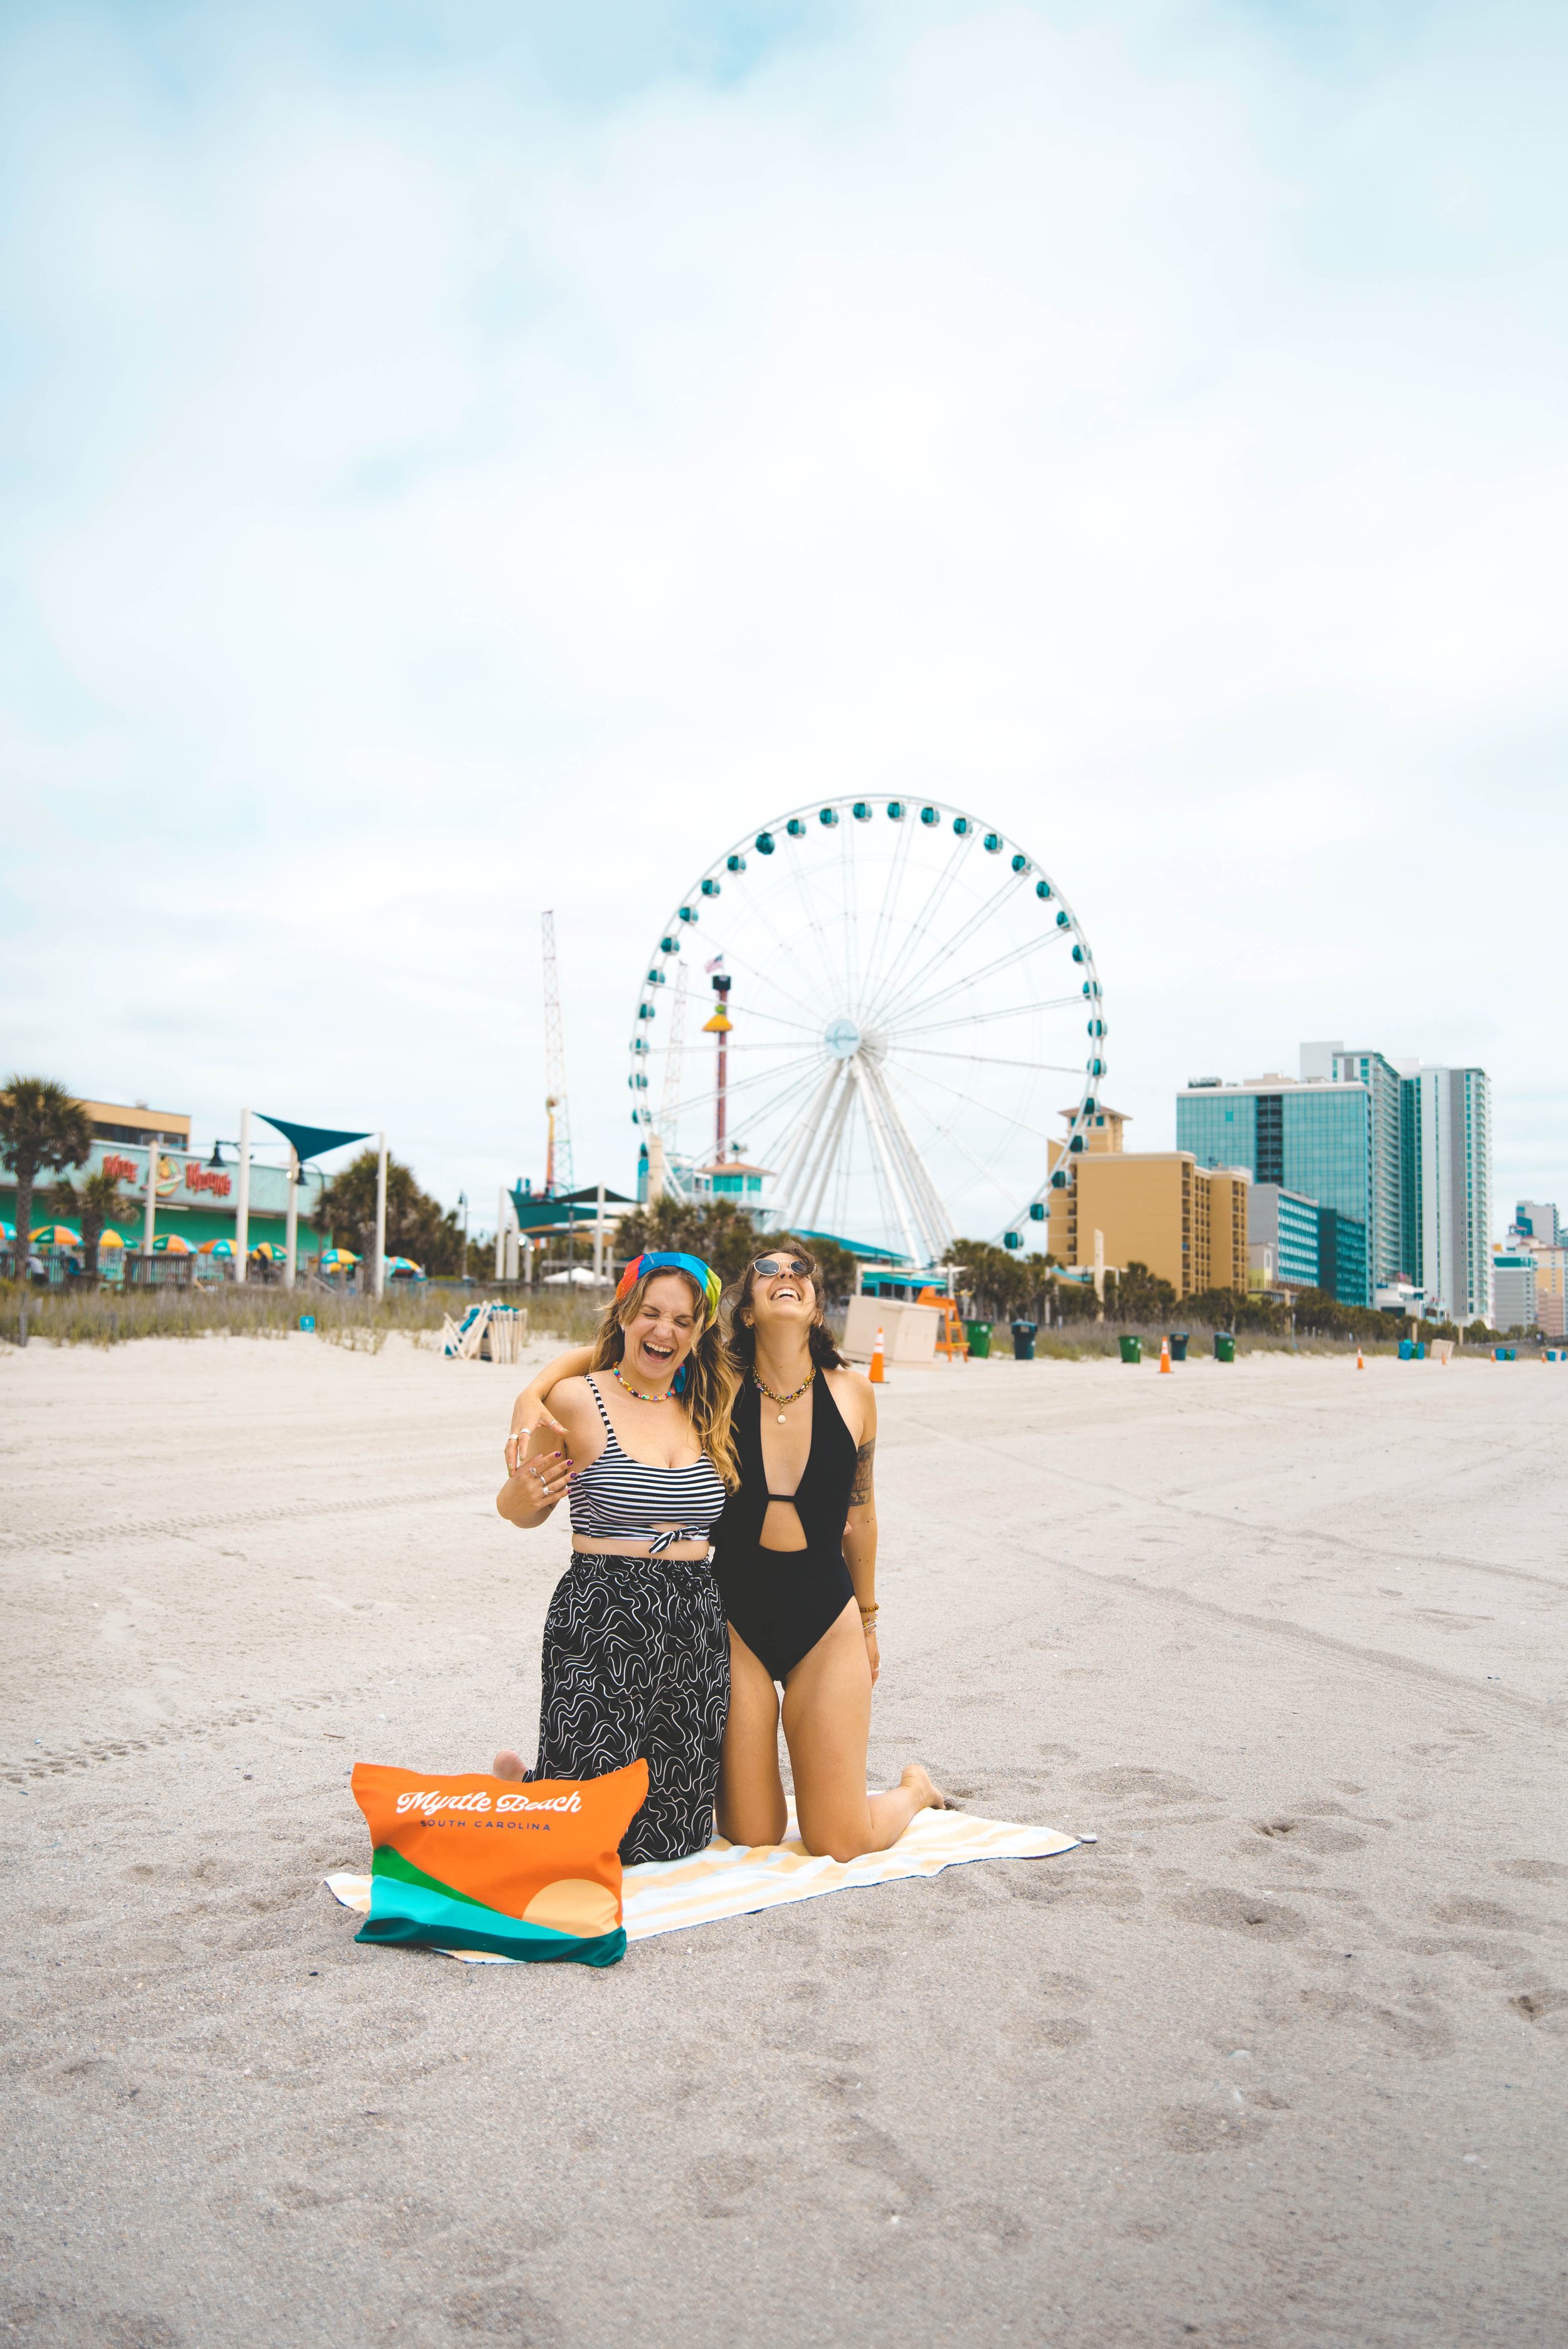 Top 10 Things to do in Myrtle Beach! — 27 Travels